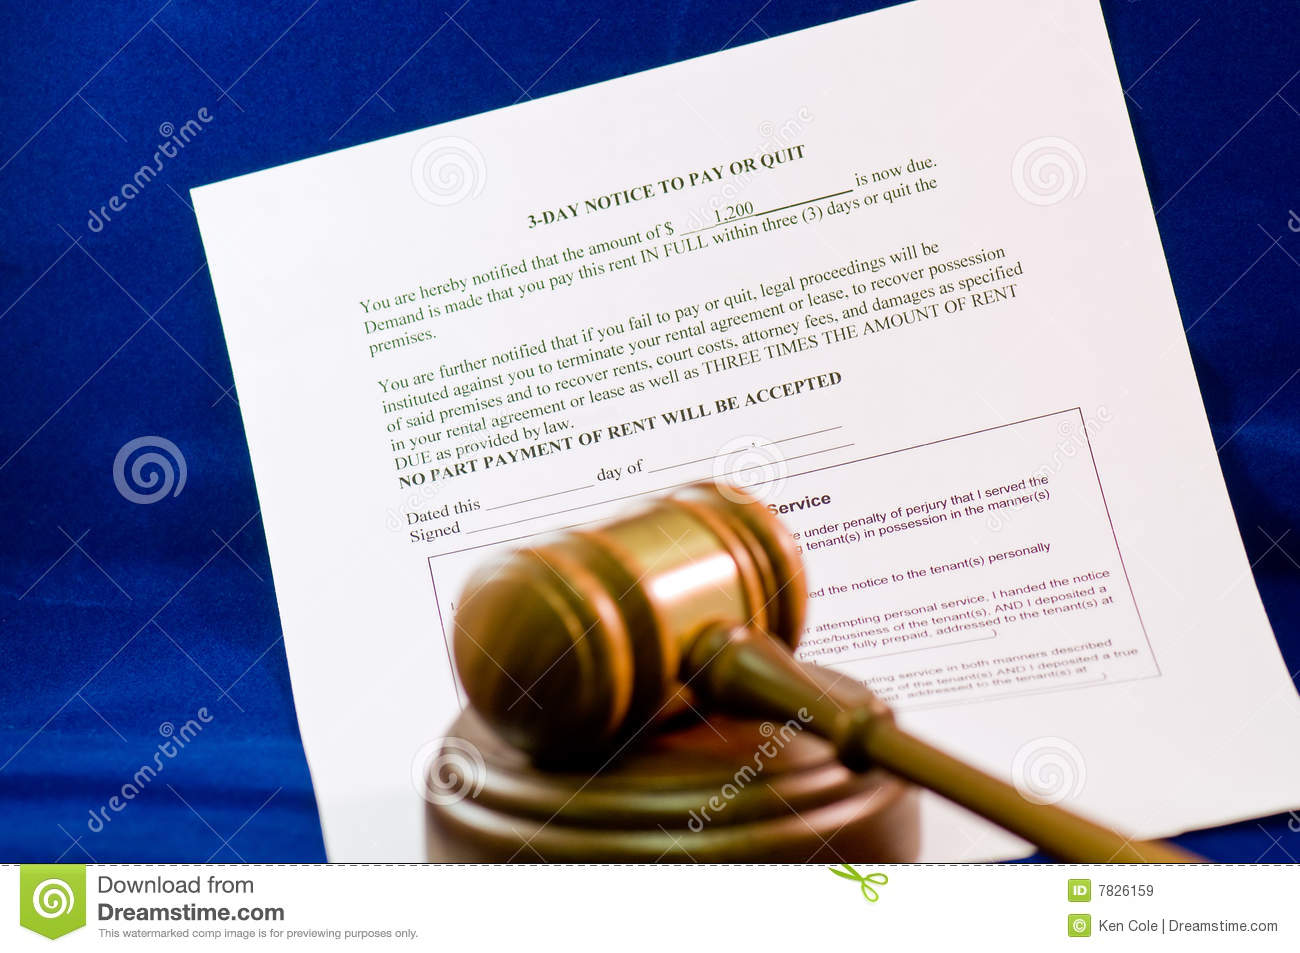 Legal Eviction Notice And Gavel Royalty Free Stock Images   Image